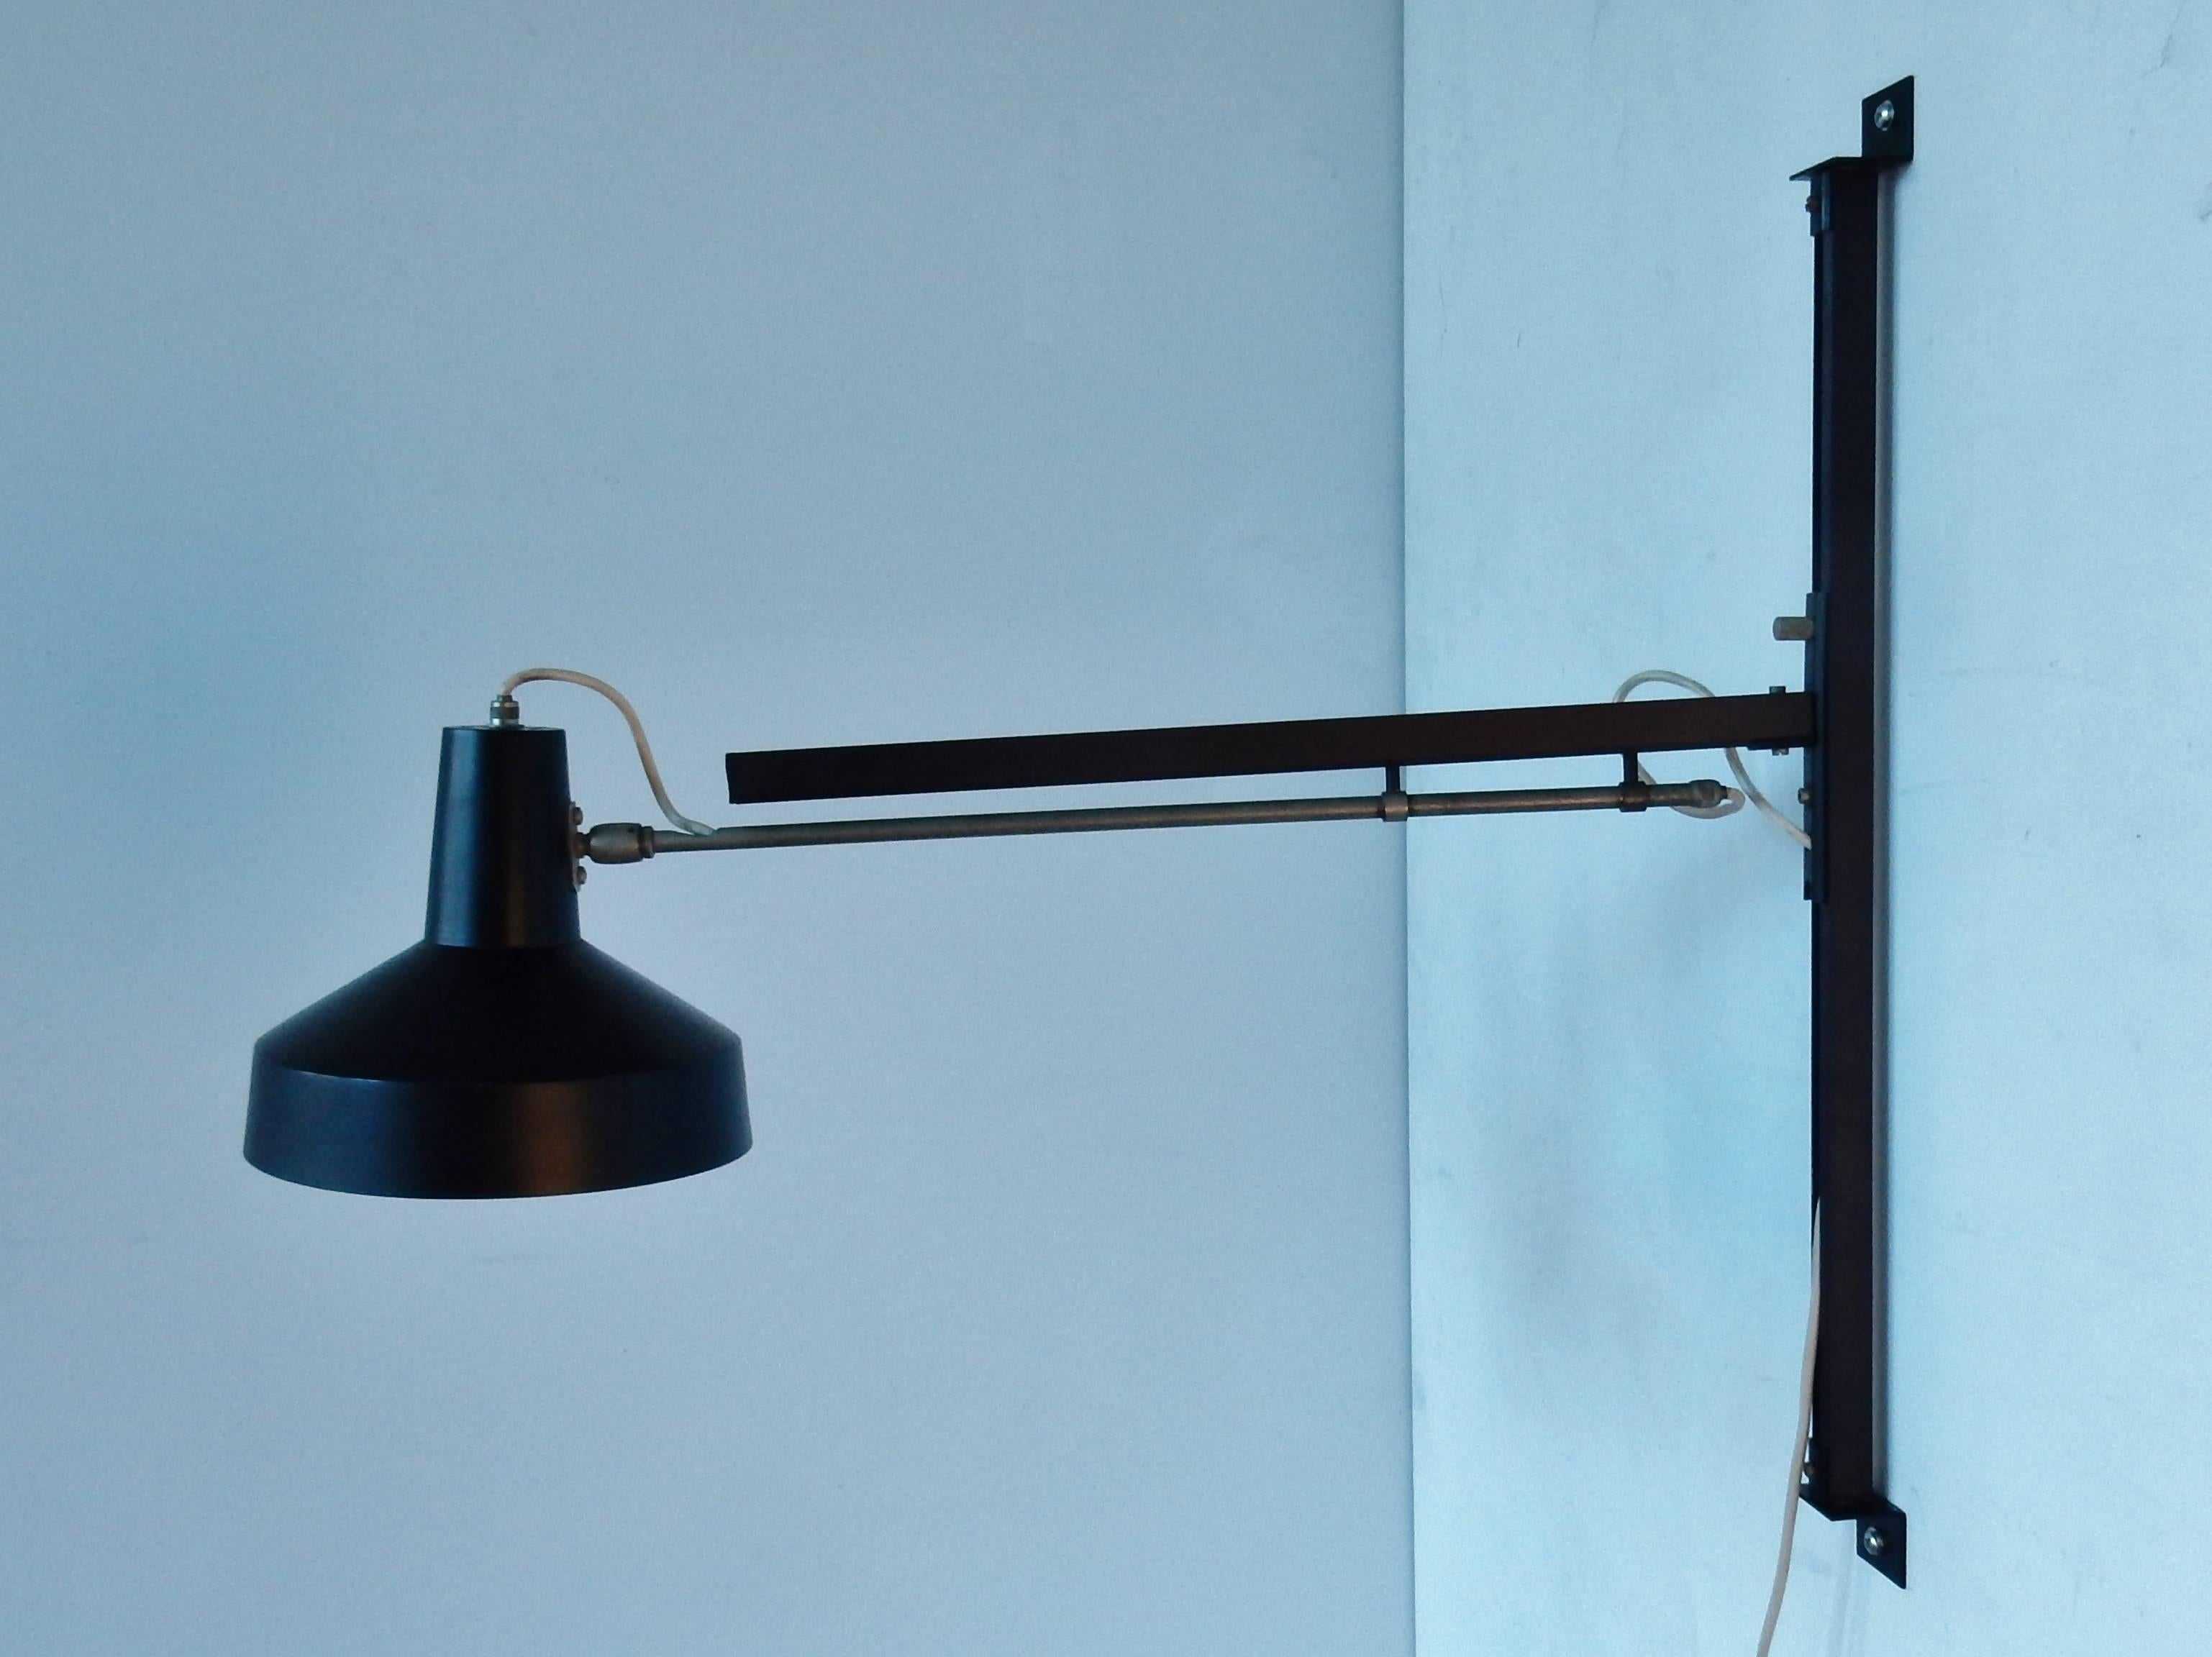 Metal Black Telescopic Wall Lamp by Hiemstra Evolux Dutch Design, Netherlands, 1960s For Sale